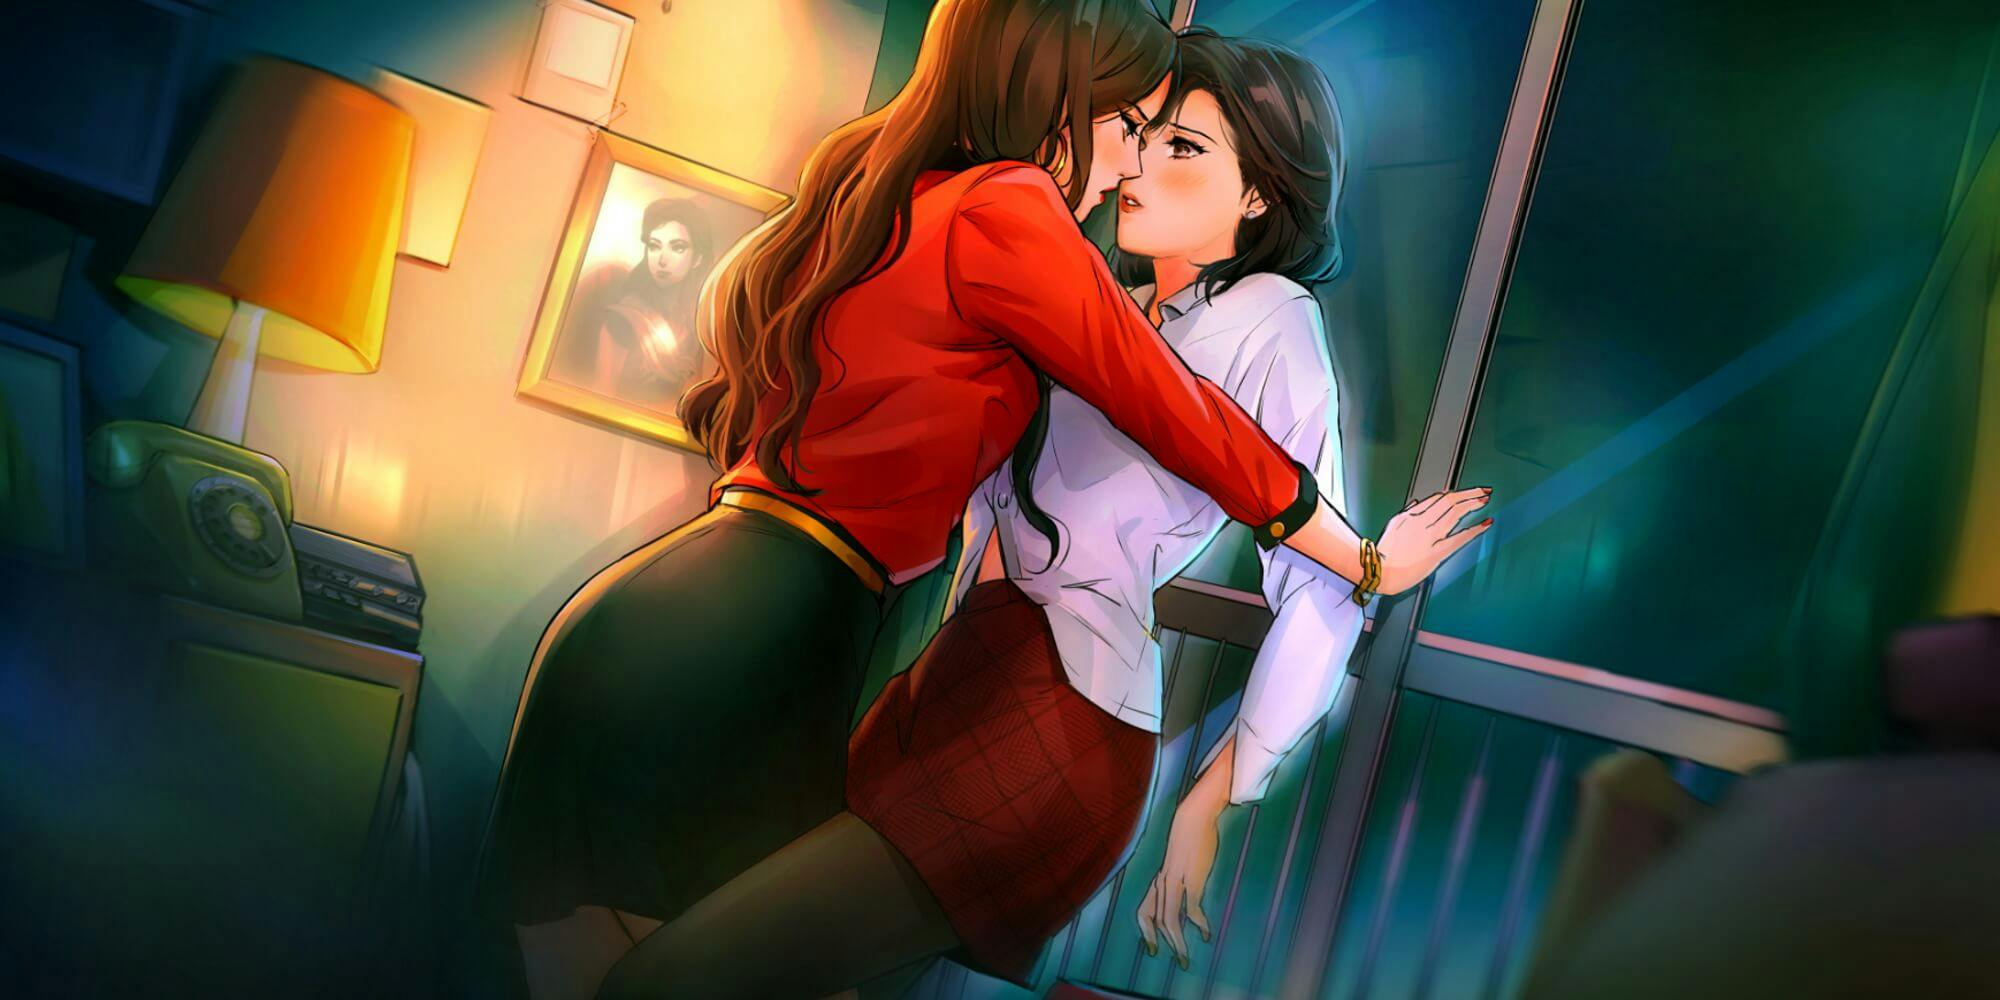 80s Asian Lesbians - A Summer's End: Adult Game Explores Asian Lesbian Life in Hong Kong